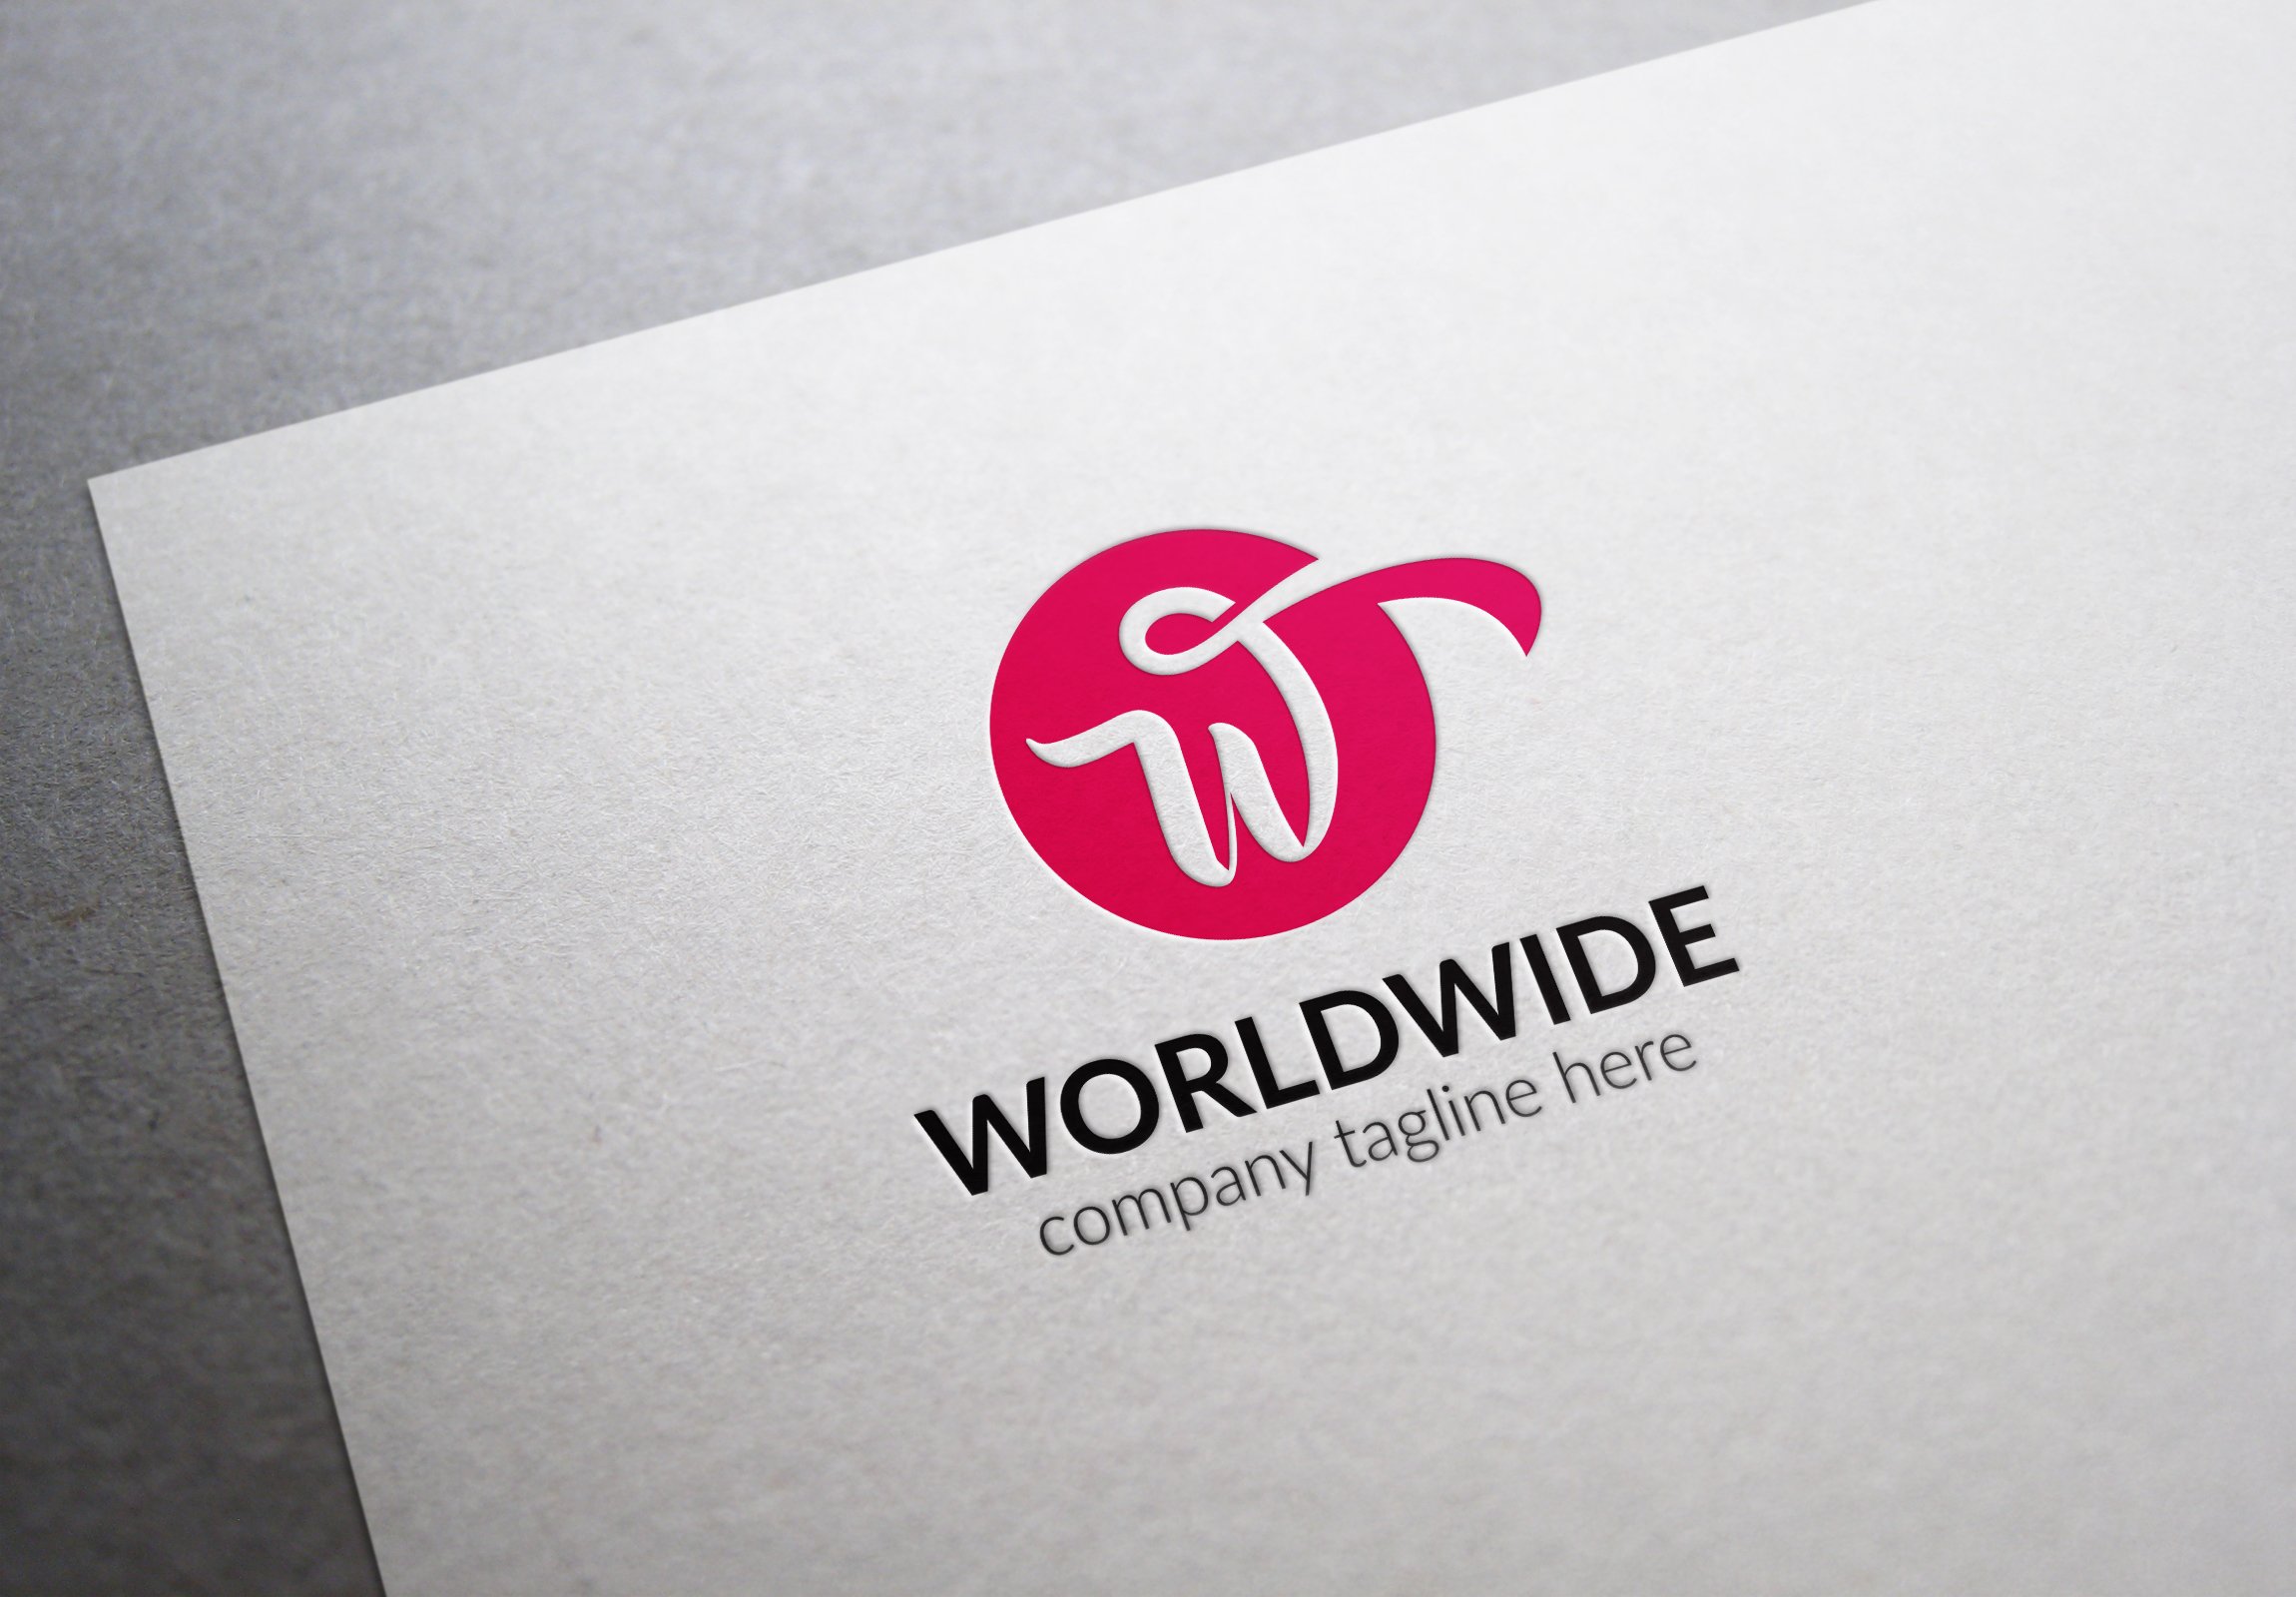 Light grey paper with a pink logo.